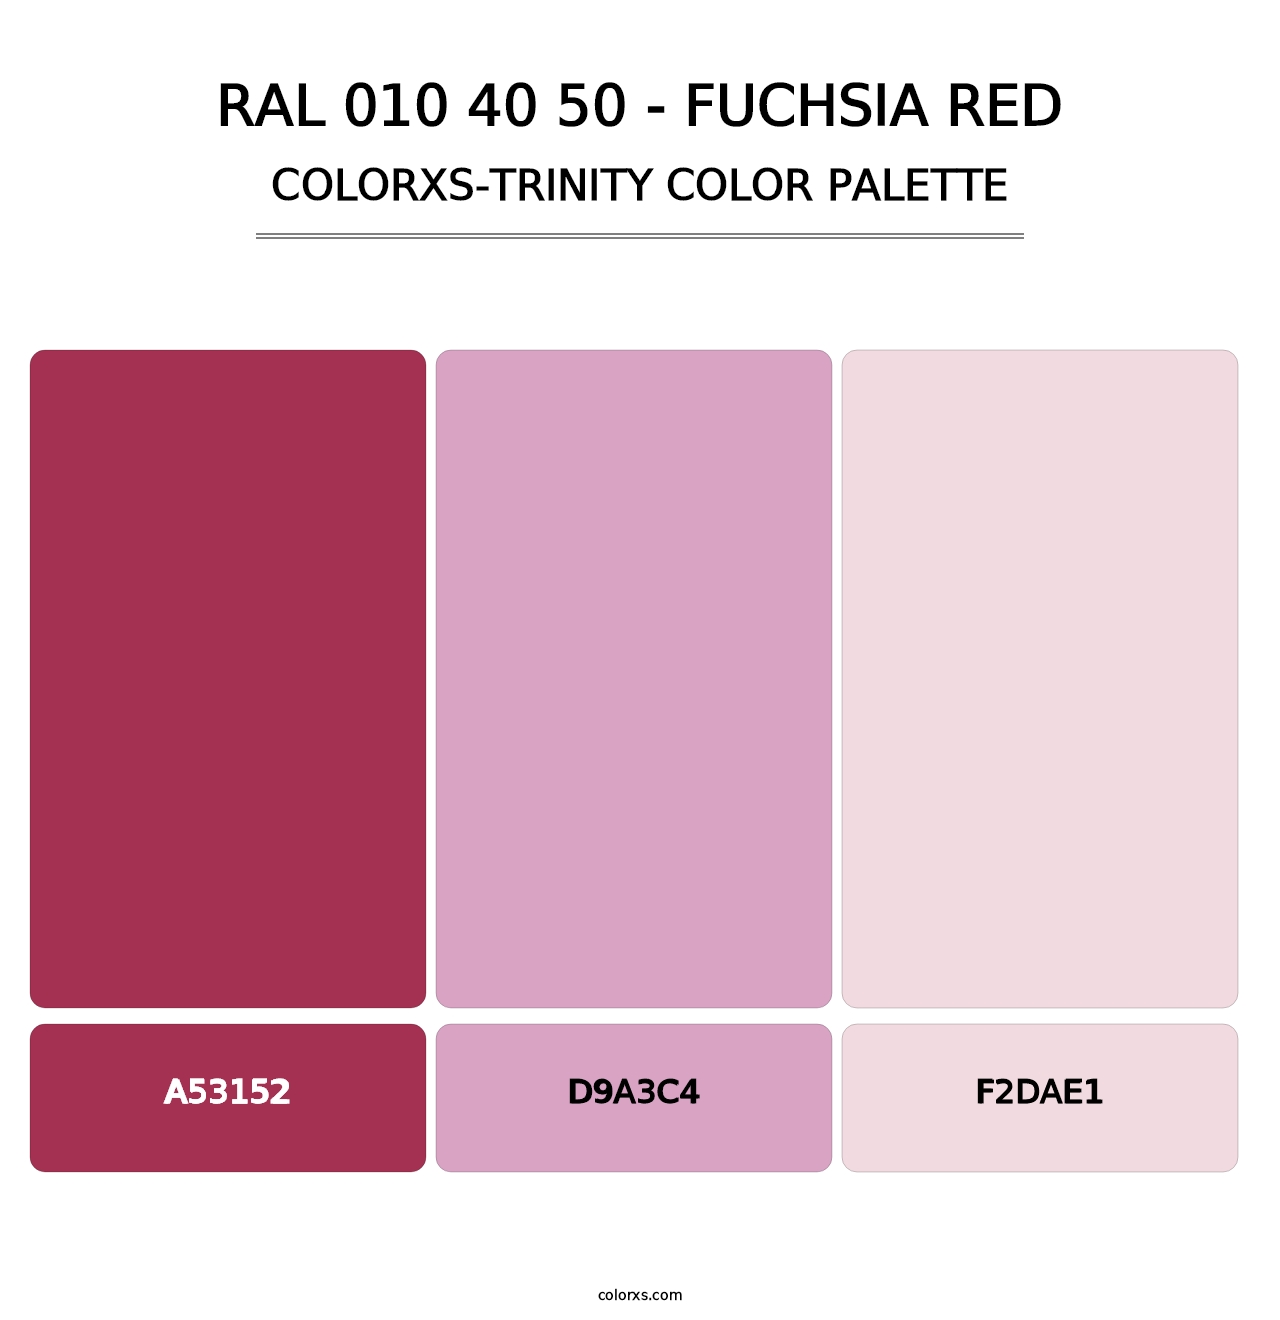 RAL 010 40 50 - Fuchsia Red - Colorxs Trinity Palette